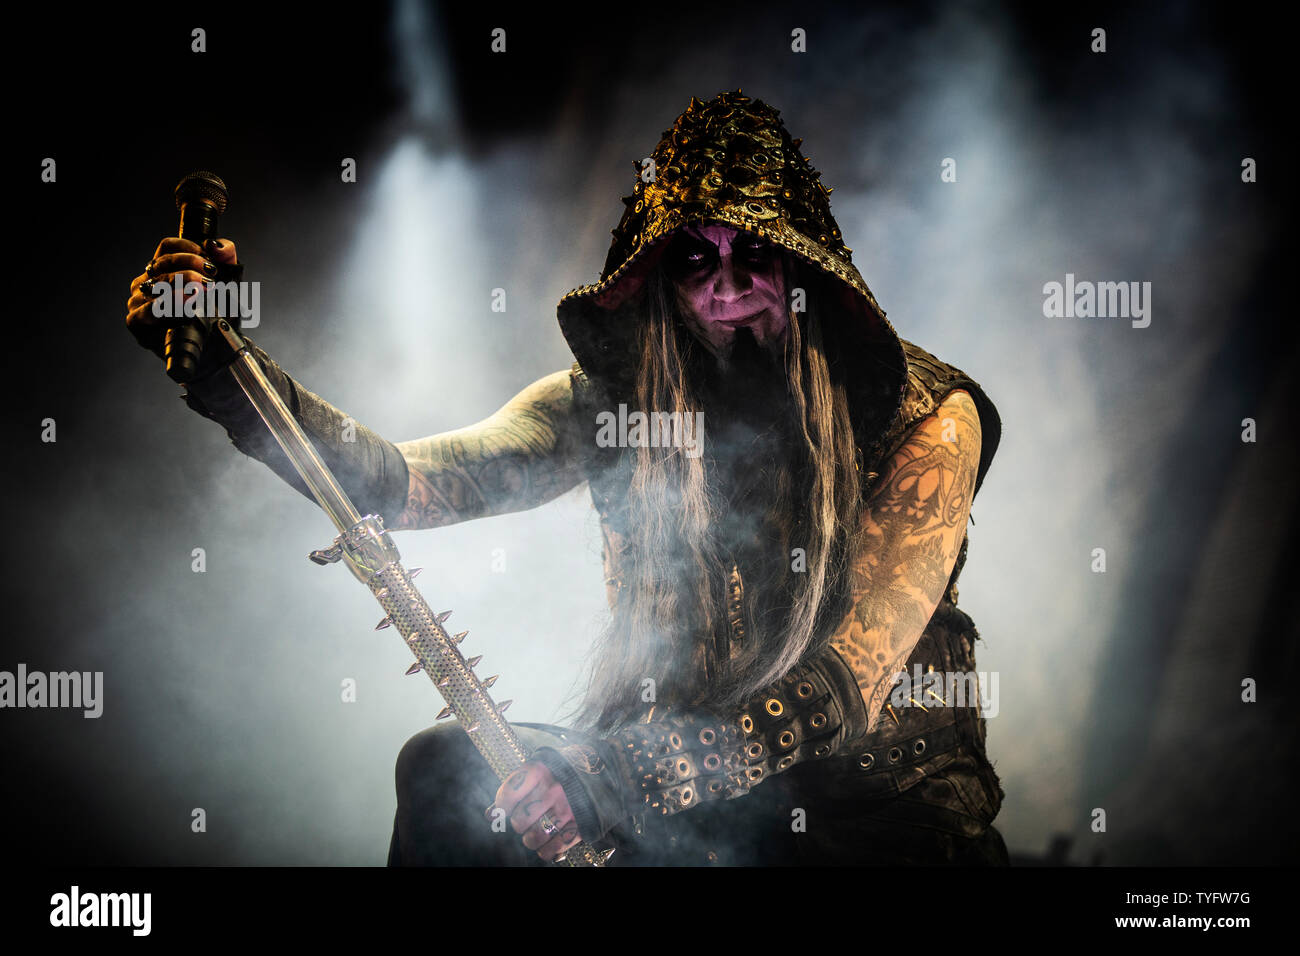 Shagrath music, videos, stats, and photos